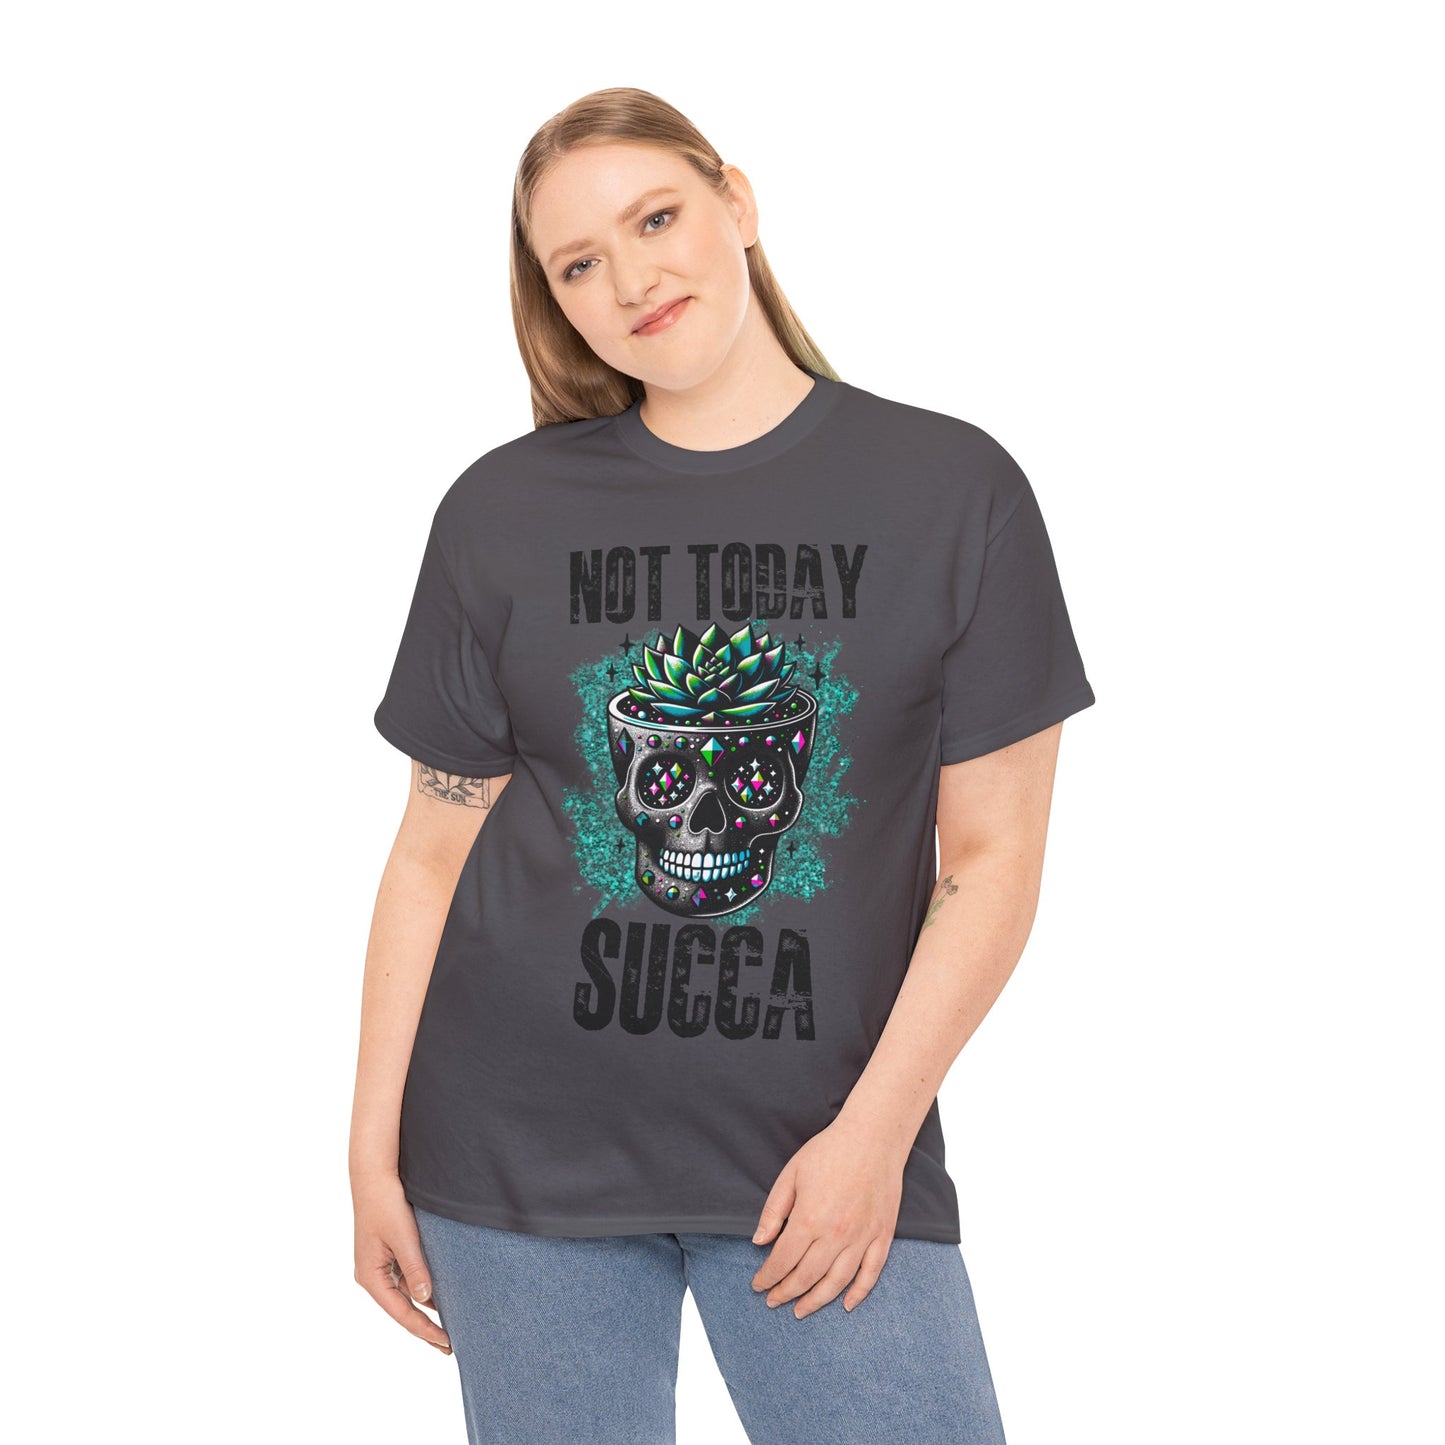 Not Today Succa Tshirt